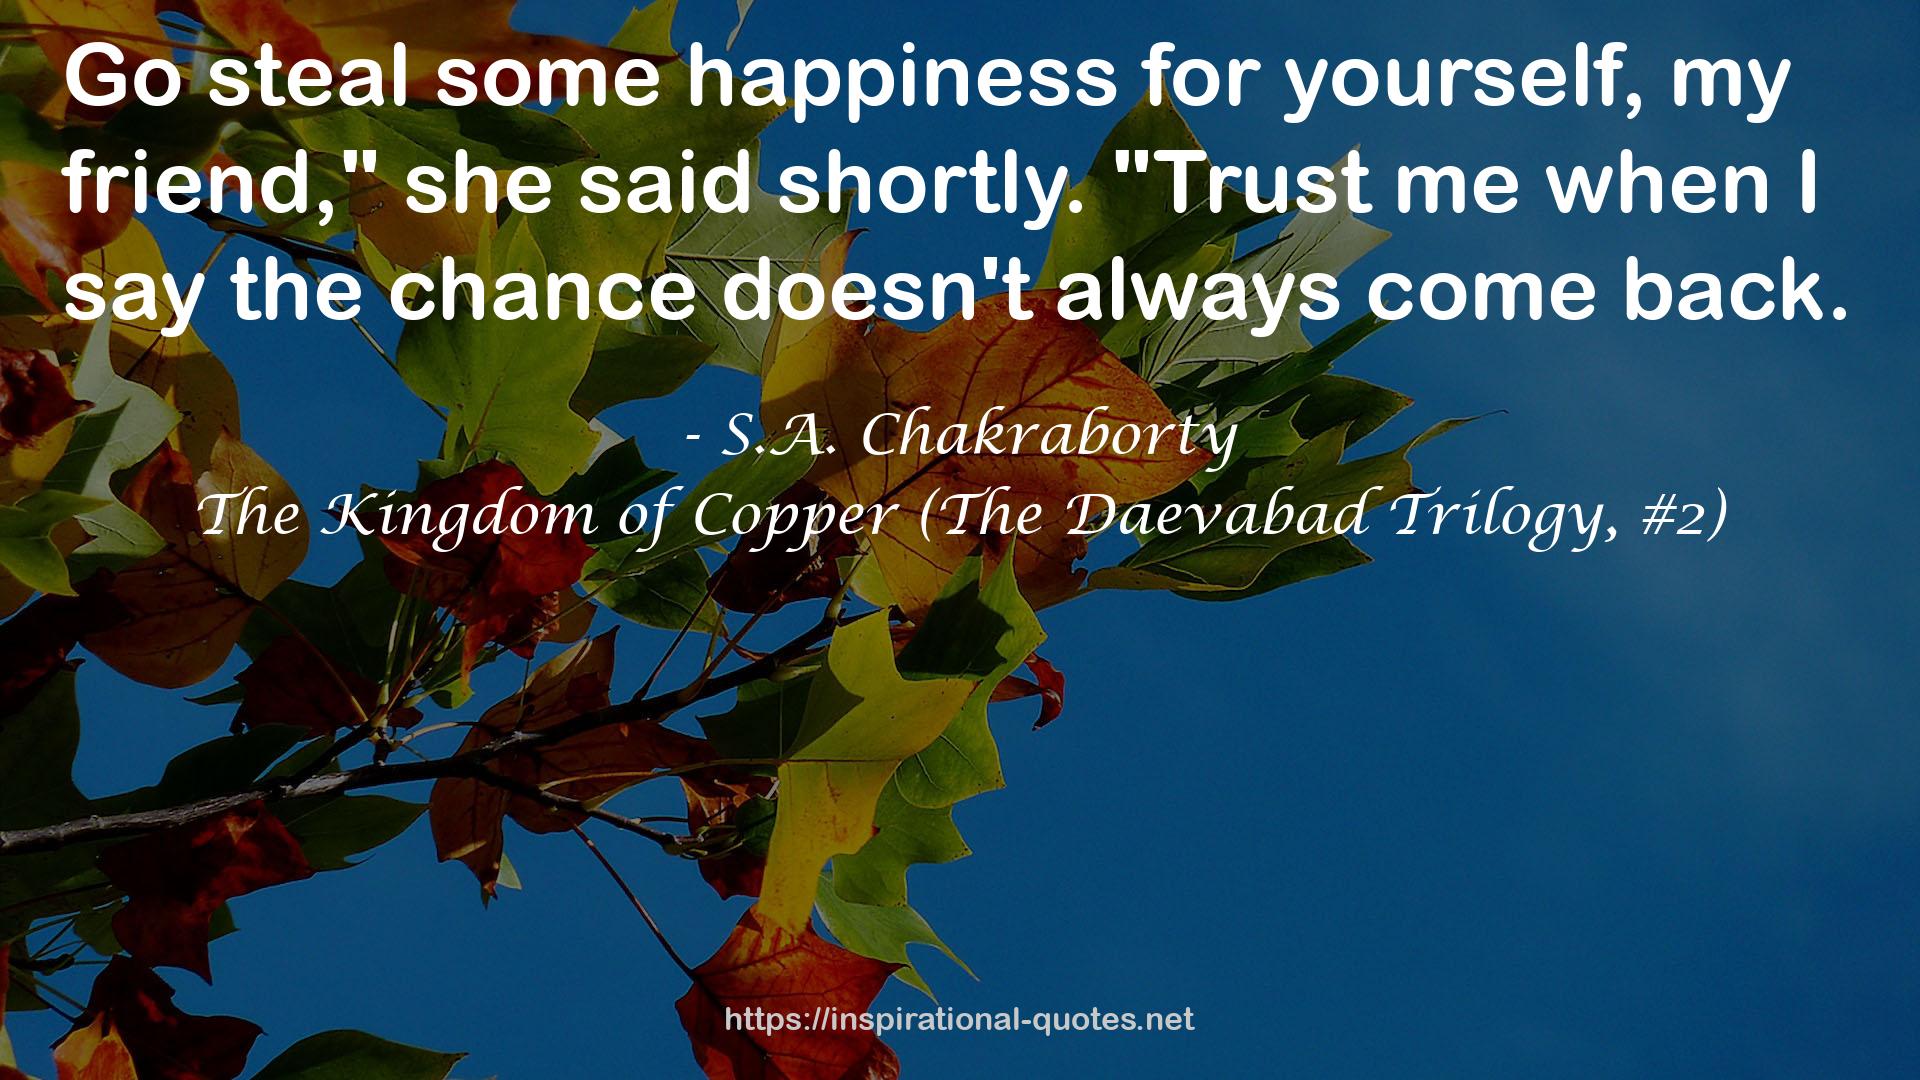 The Kingdom of Copper (The Daevabad Trilogy, #2) QUOTES